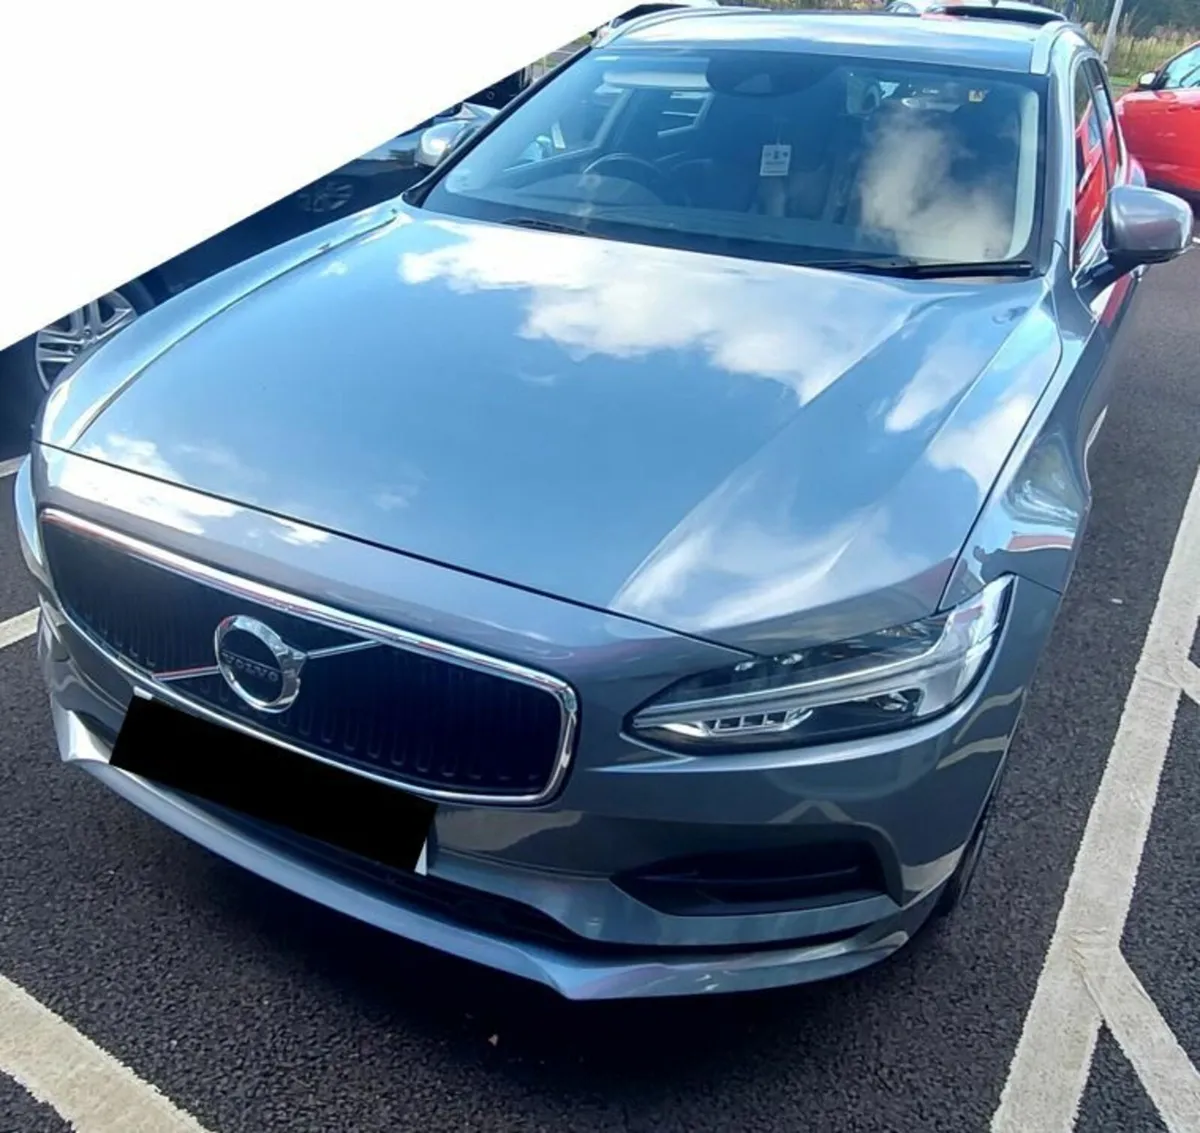 Volvo V90 (oct) 2018 ( MUST GO)  low milage. - Image 1